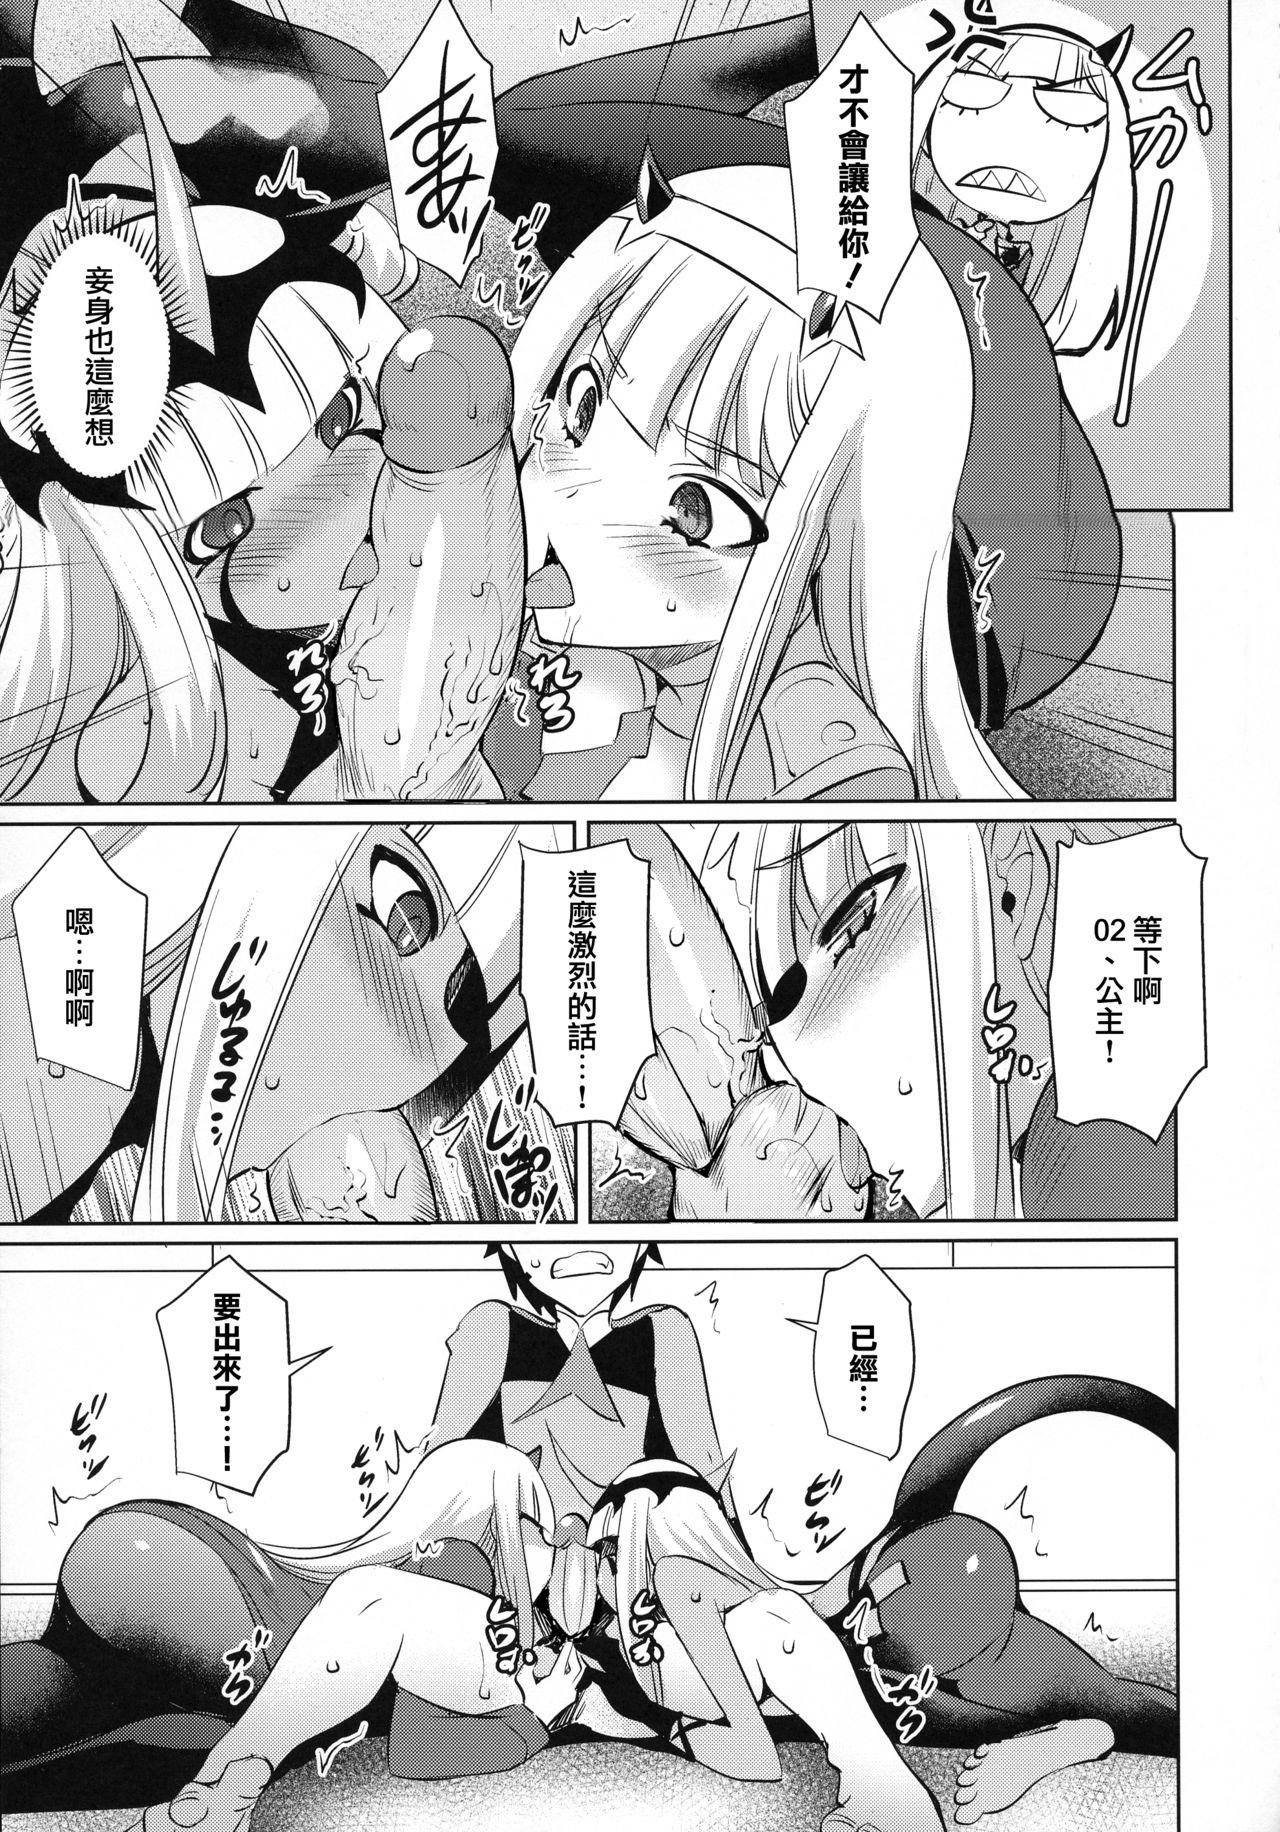 Pussy Lick Darling in the One and Two - Darling in the franxx Foot Fetish - Page 8